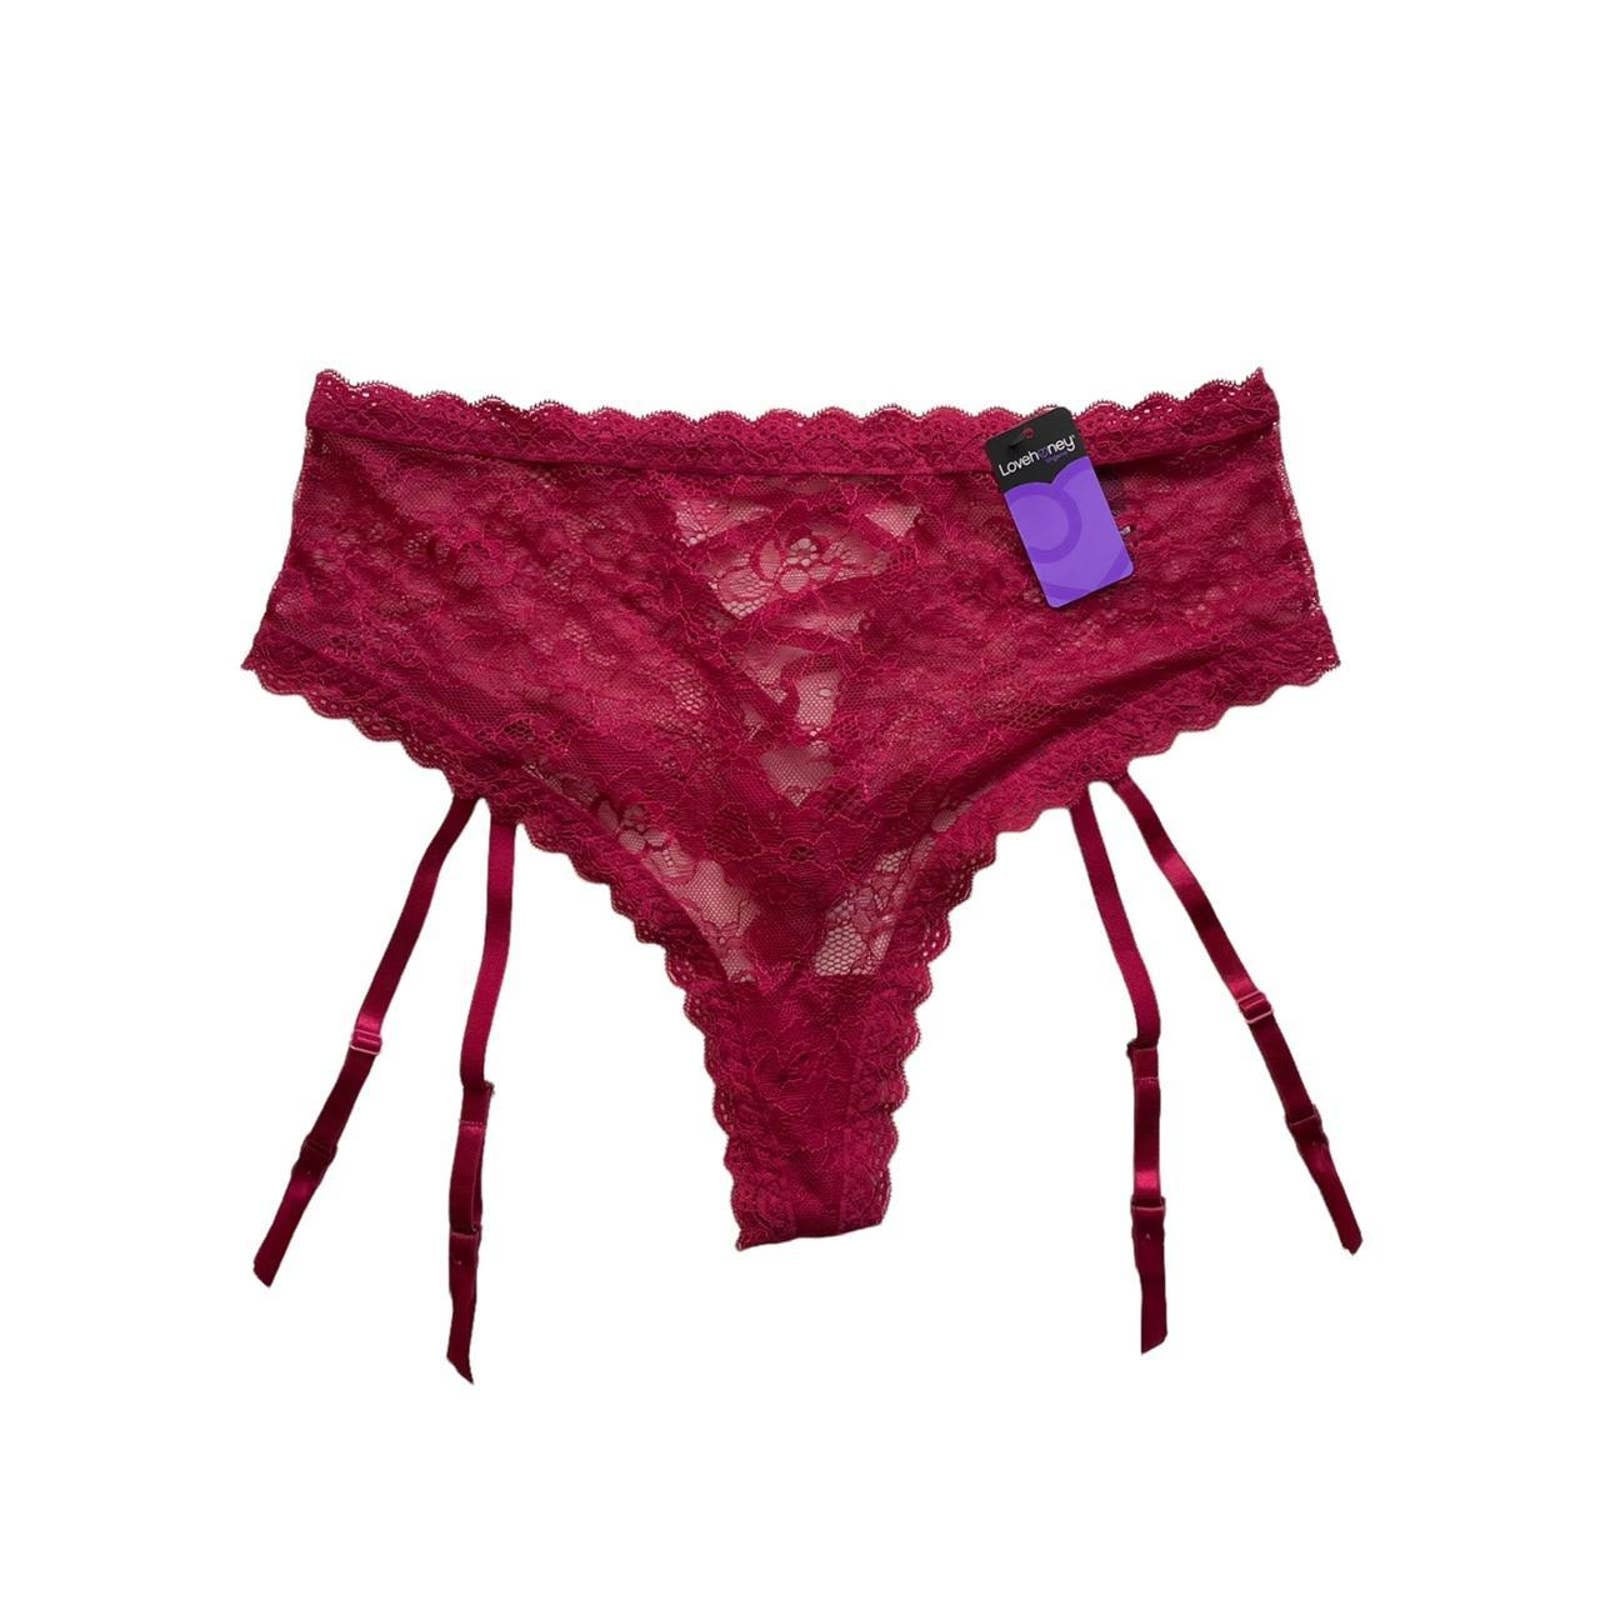 Personalize a Victoria Secret Red Lace Waist Thong, FAST SHIPPING